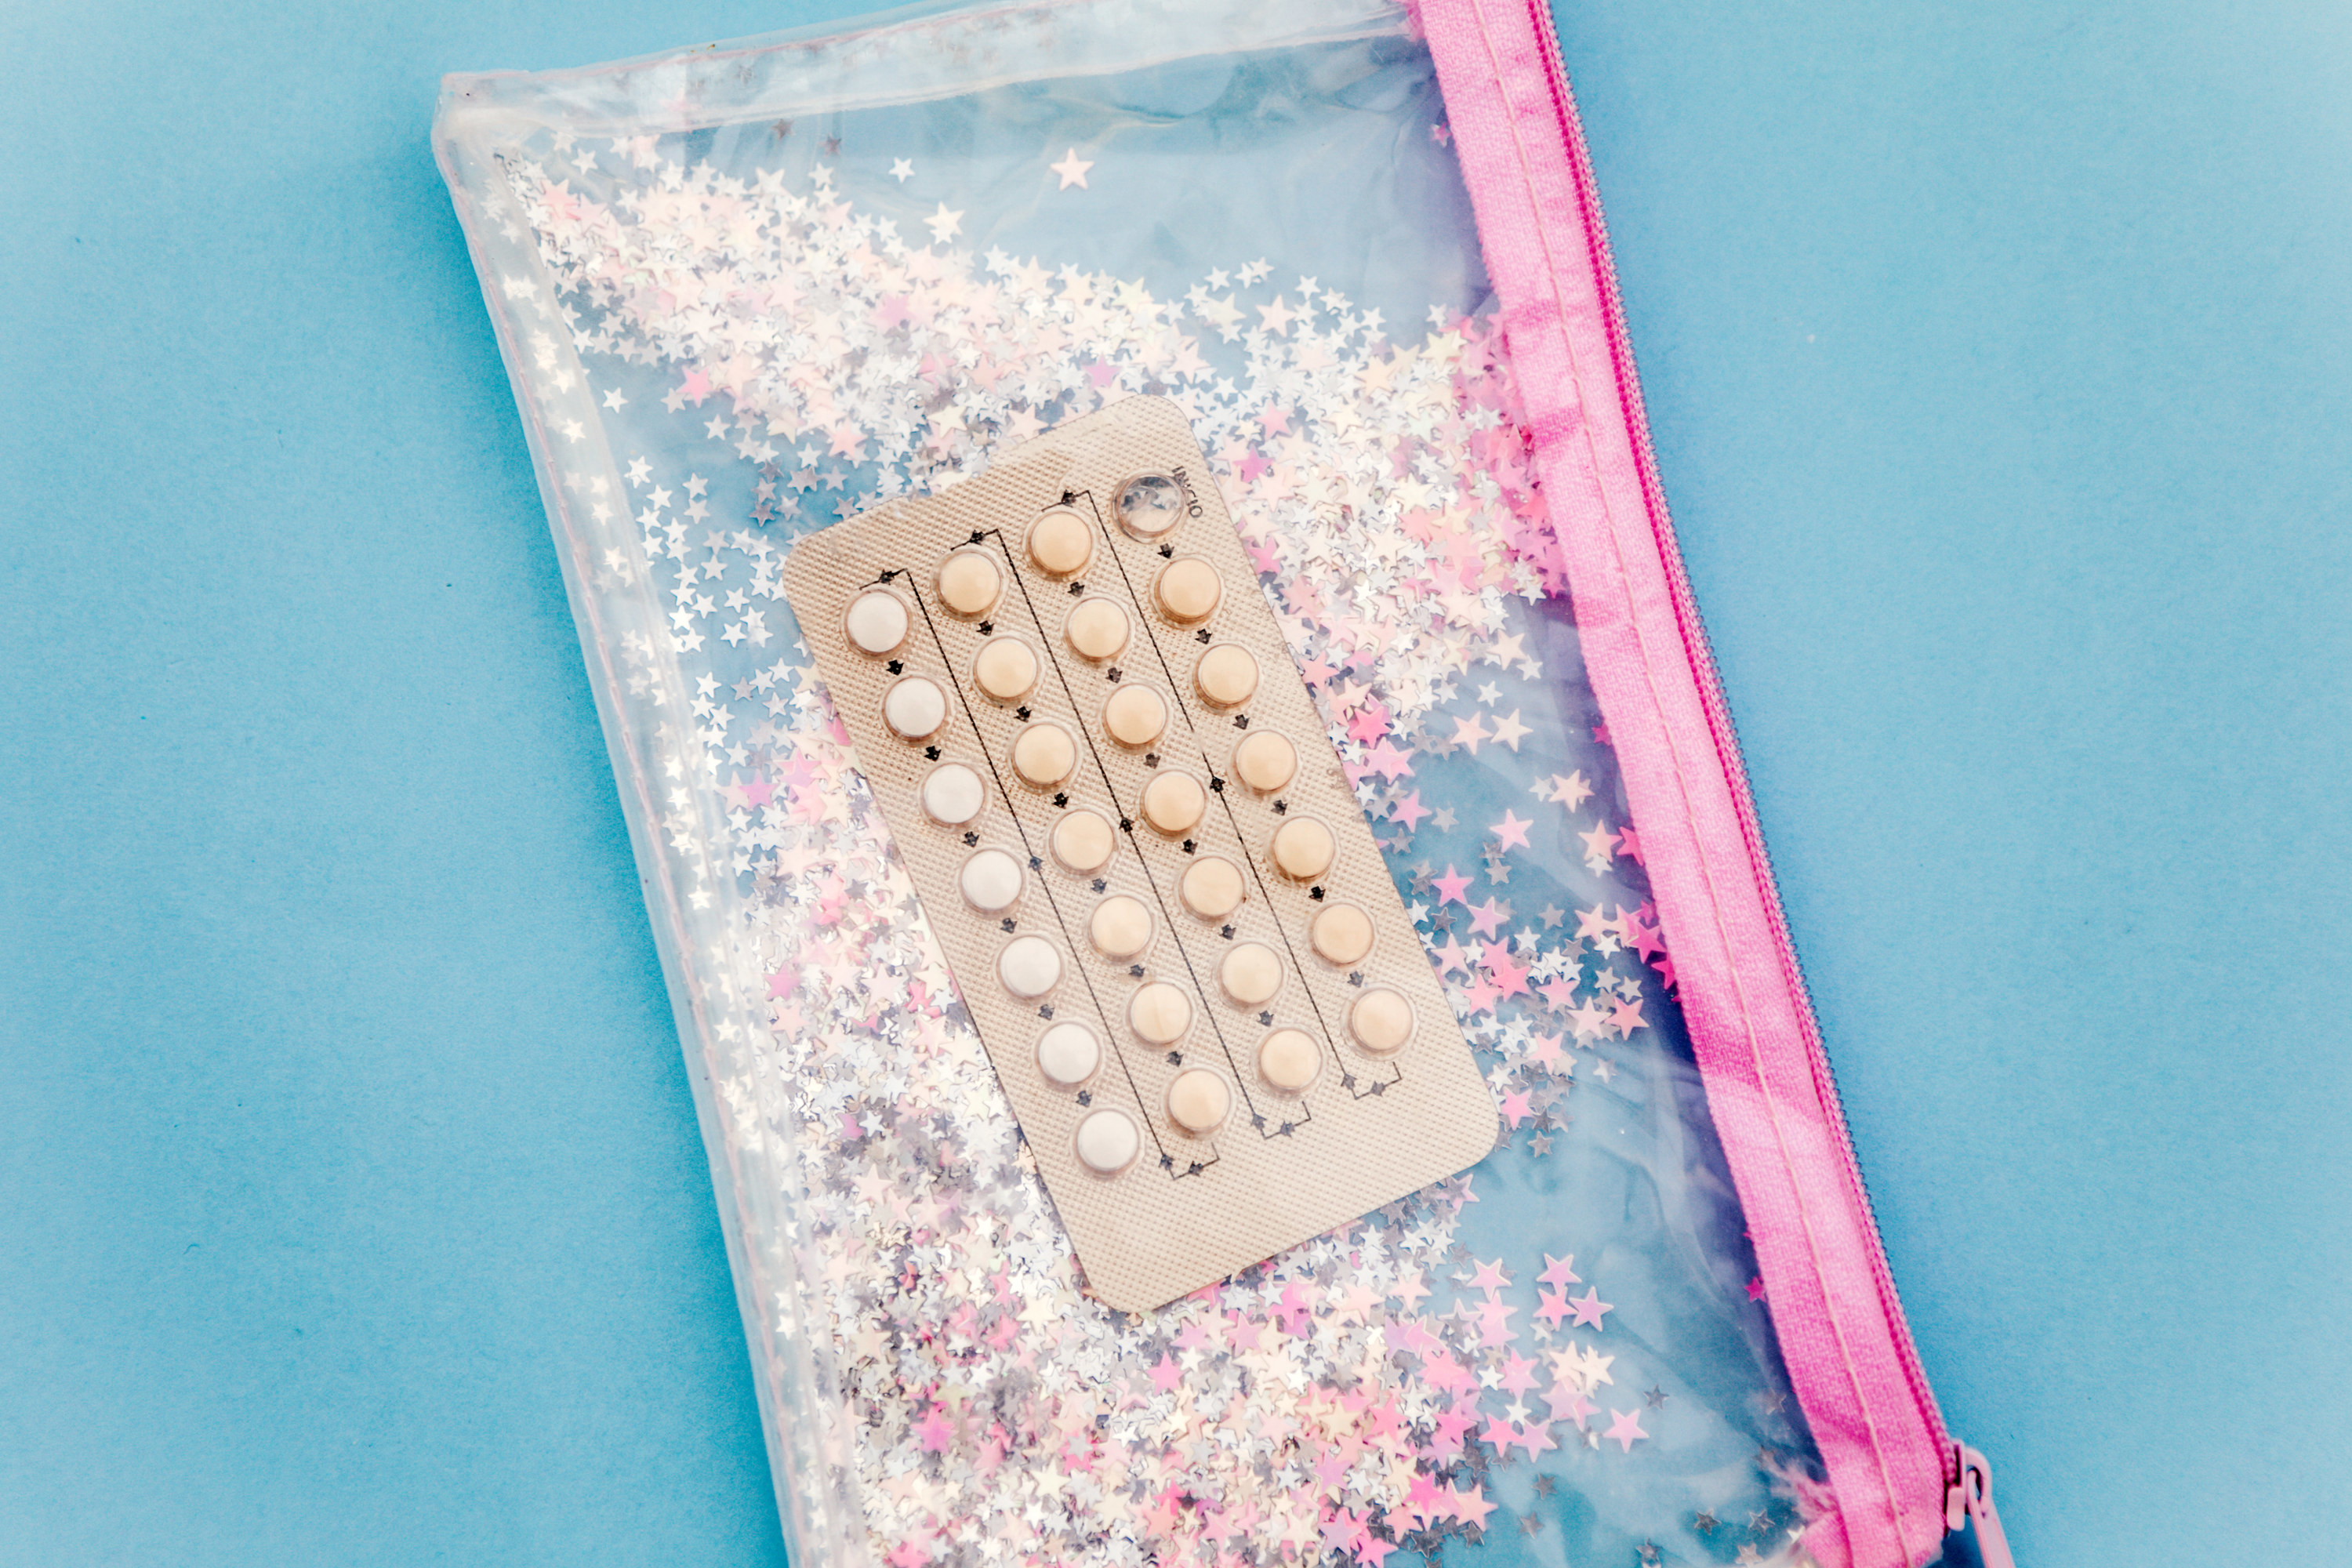 A package of birth control pills sit on a sparkly pencil case